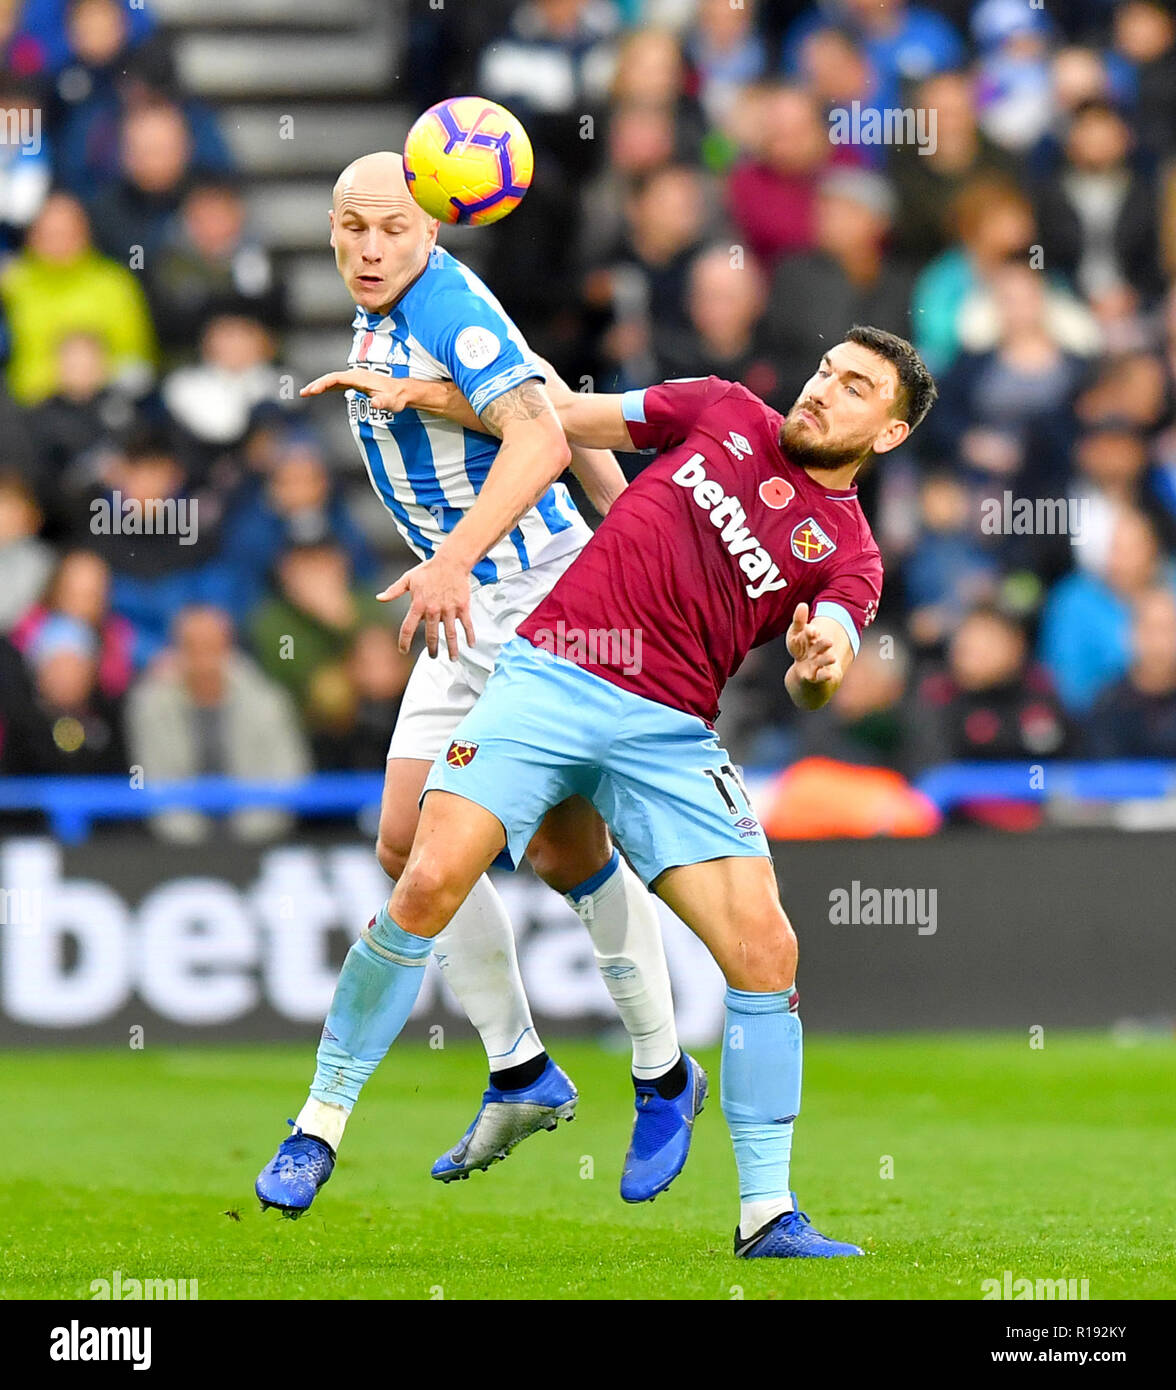 Huddersfield Town's Aaron Mooy (left) and West Ham United's Robert Snodgrass battle for the ball during the Premier League match at the John Smith's Stadium, Huddersfield. Stock Photo